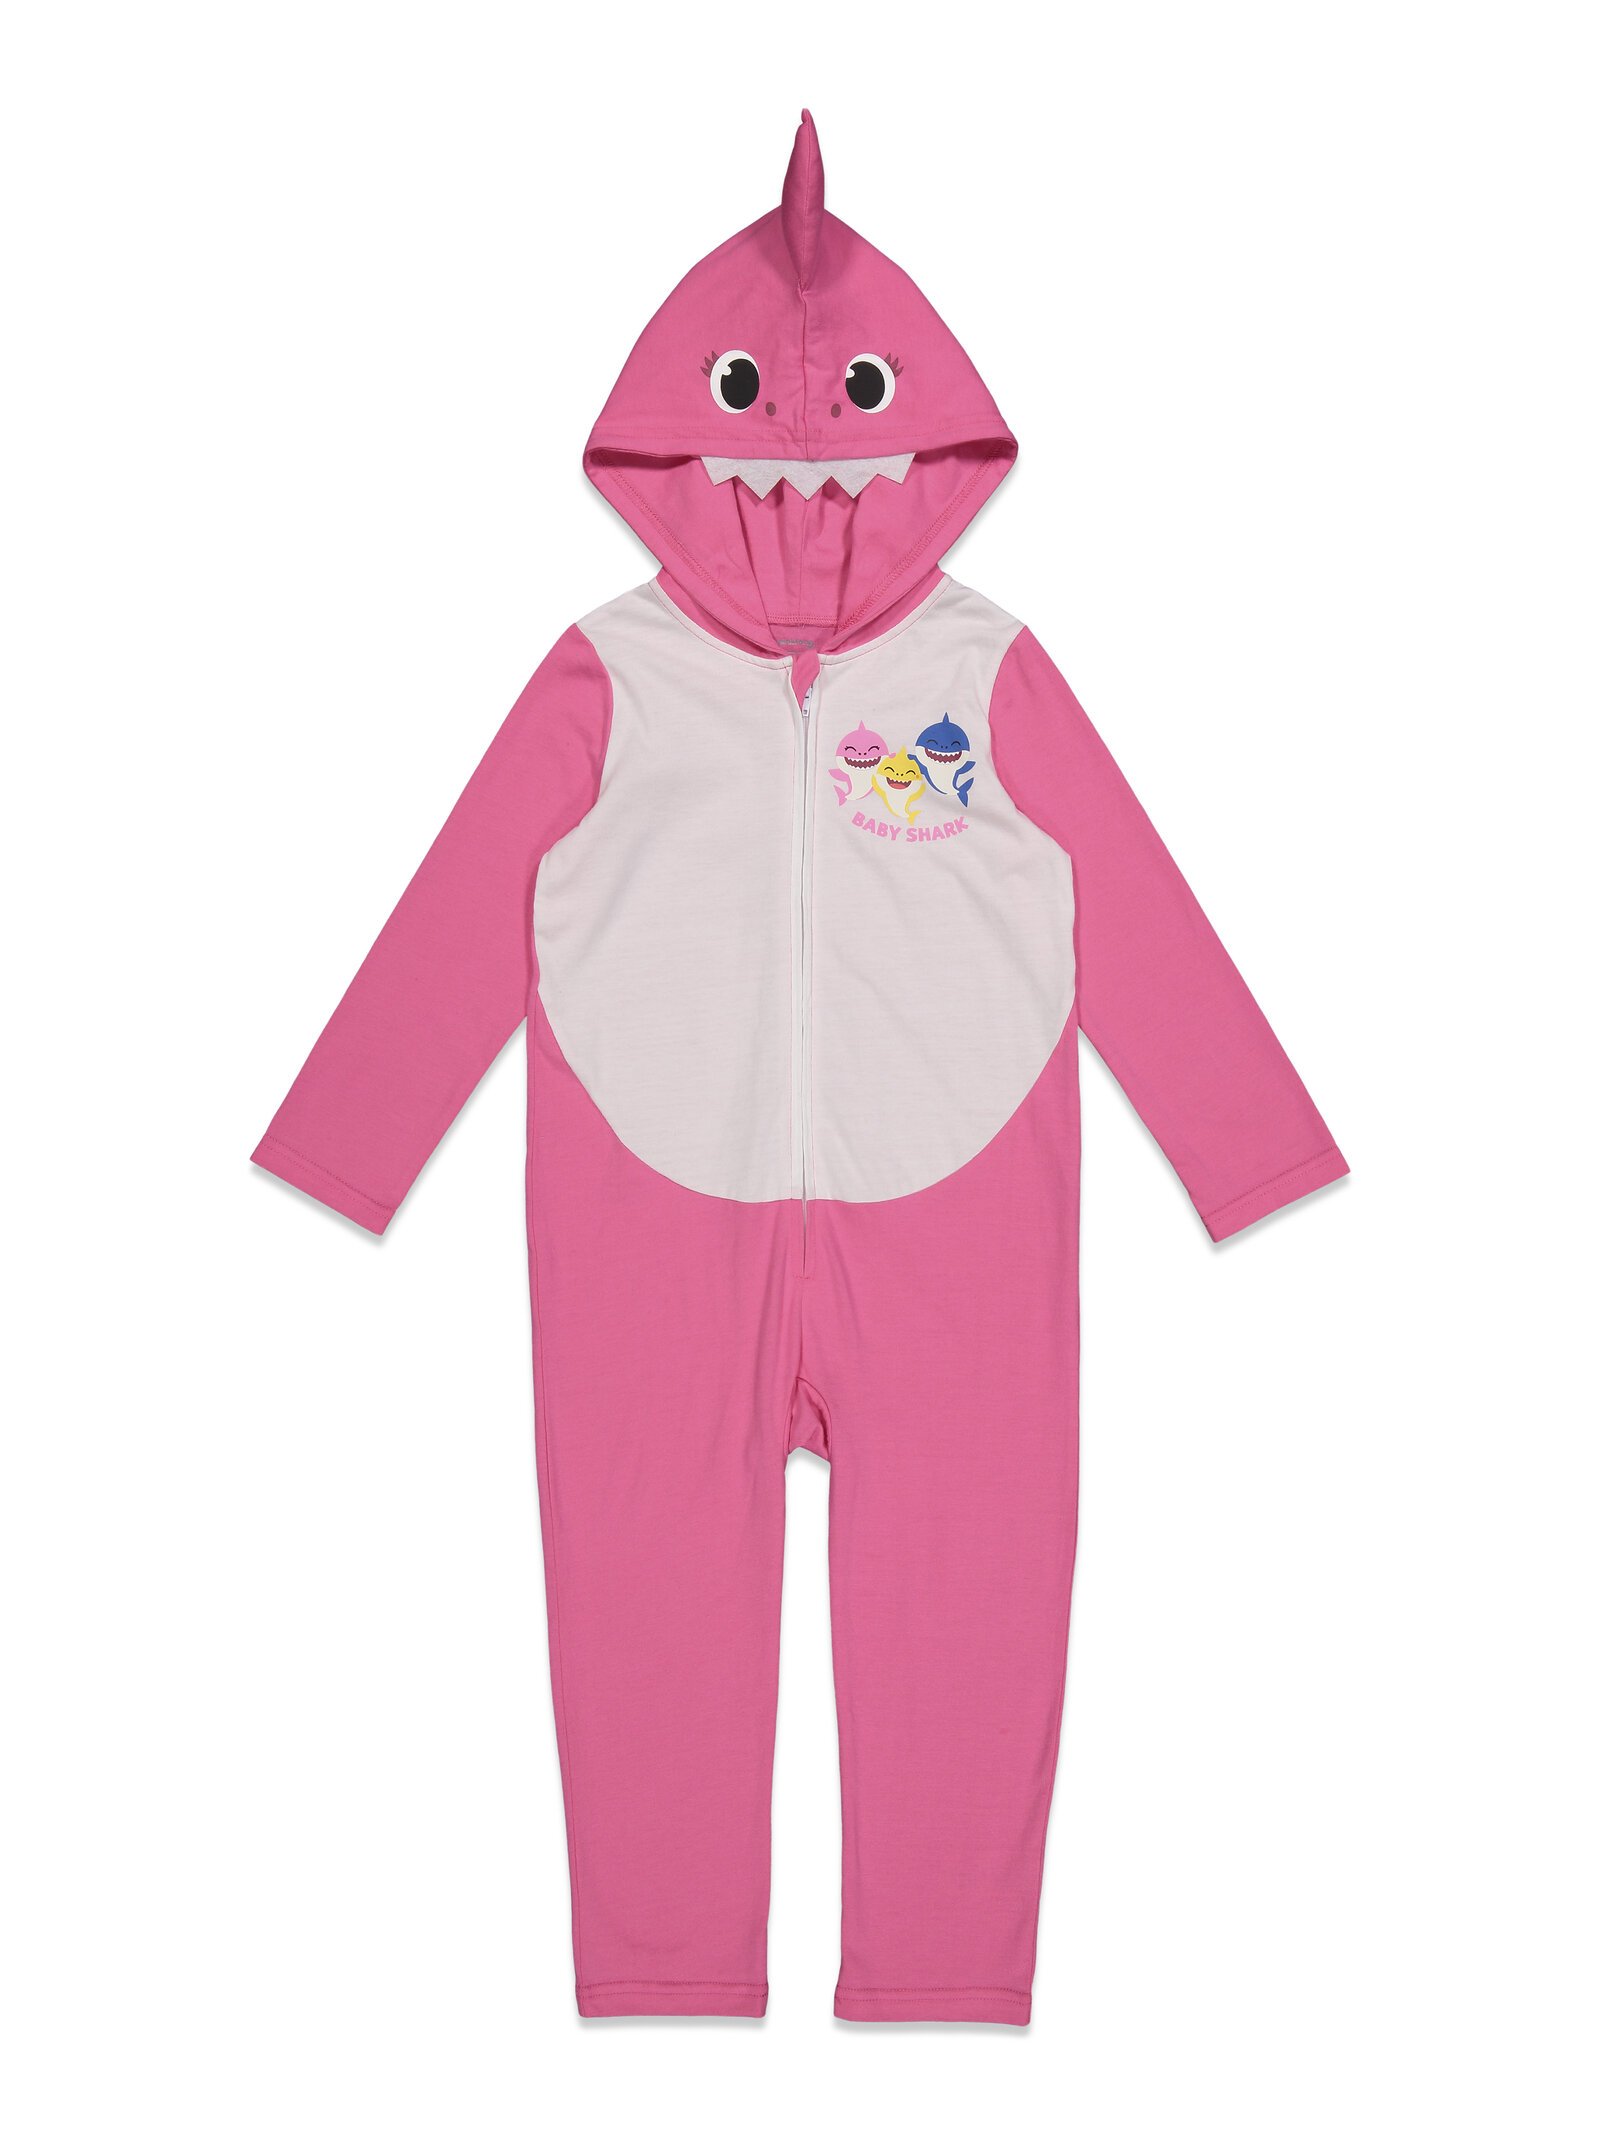 Pinkfong Baby Shark Infant Baby Girls Zip Up Costume Coverall Newborn to Little Kid - image 1 of 5